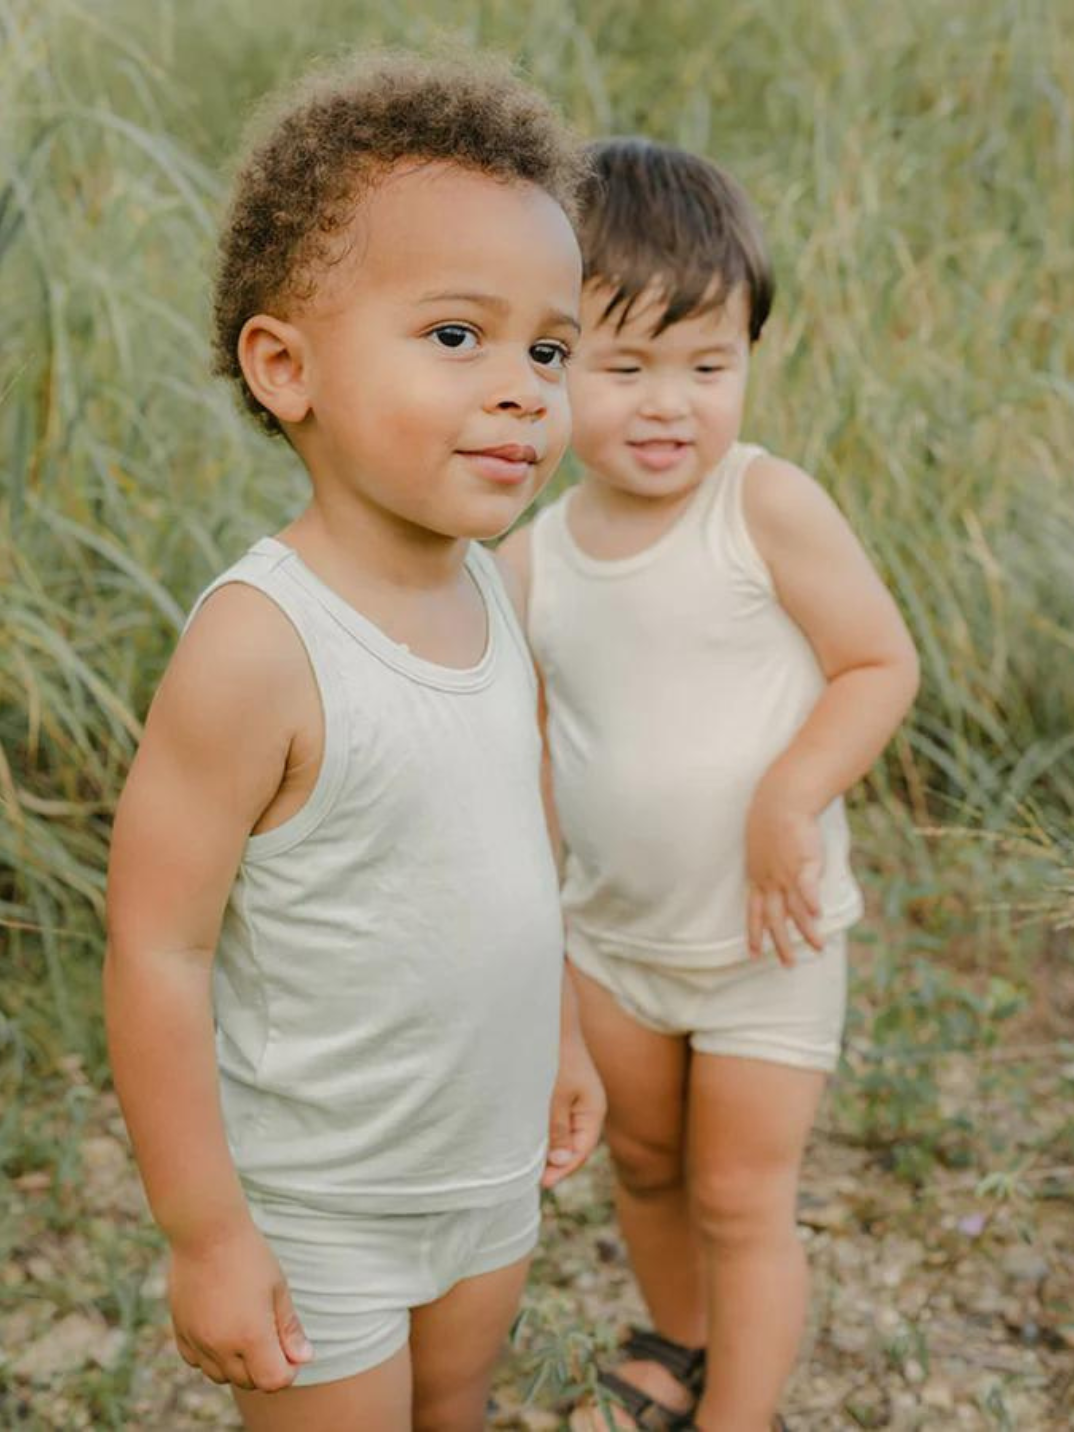 These tank tops are super soft and gentle on your little ones' skin. Designed with a loose, unisex fit for play, movement and a comfy night's rest. Wear the breathable layer under garments for day or snooze in the ultimate comfort. Made with eco modal fabric. This set comes with 1x green tank top and 1x cream tank top.